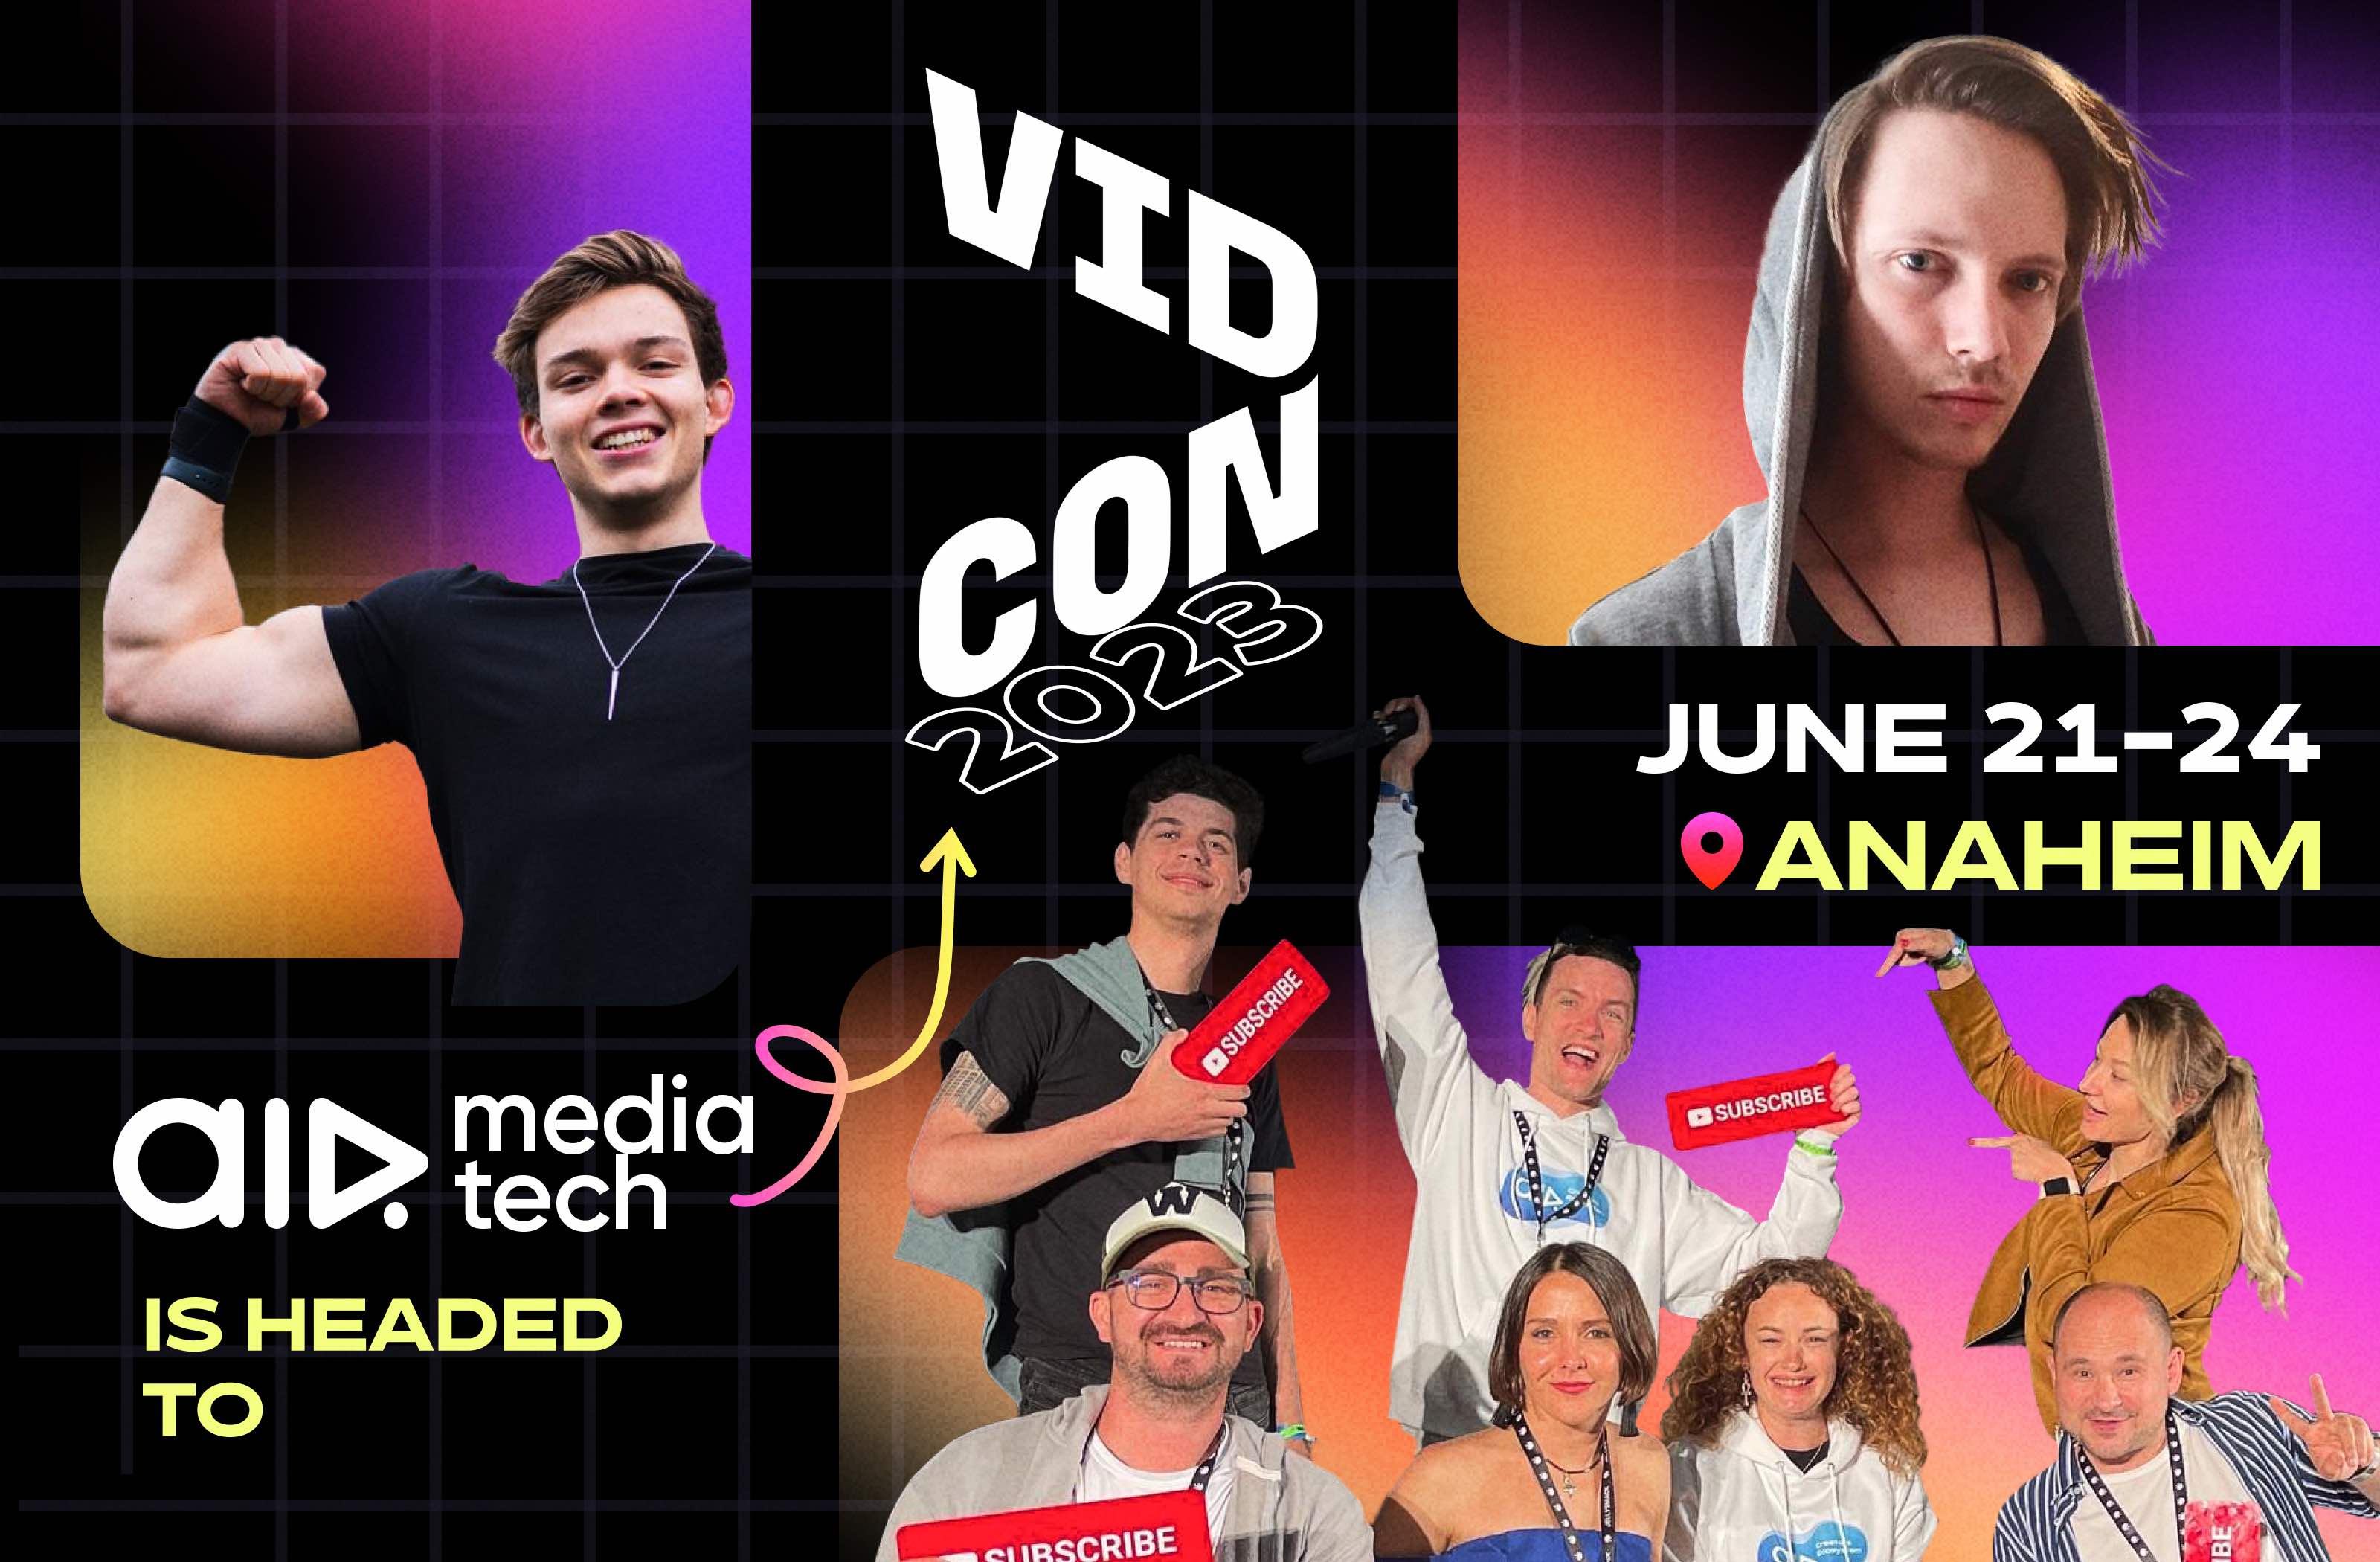 Igniting Connections: AIR Media-Tech Joins Creators And Industry Pros At VidCon Anaheim